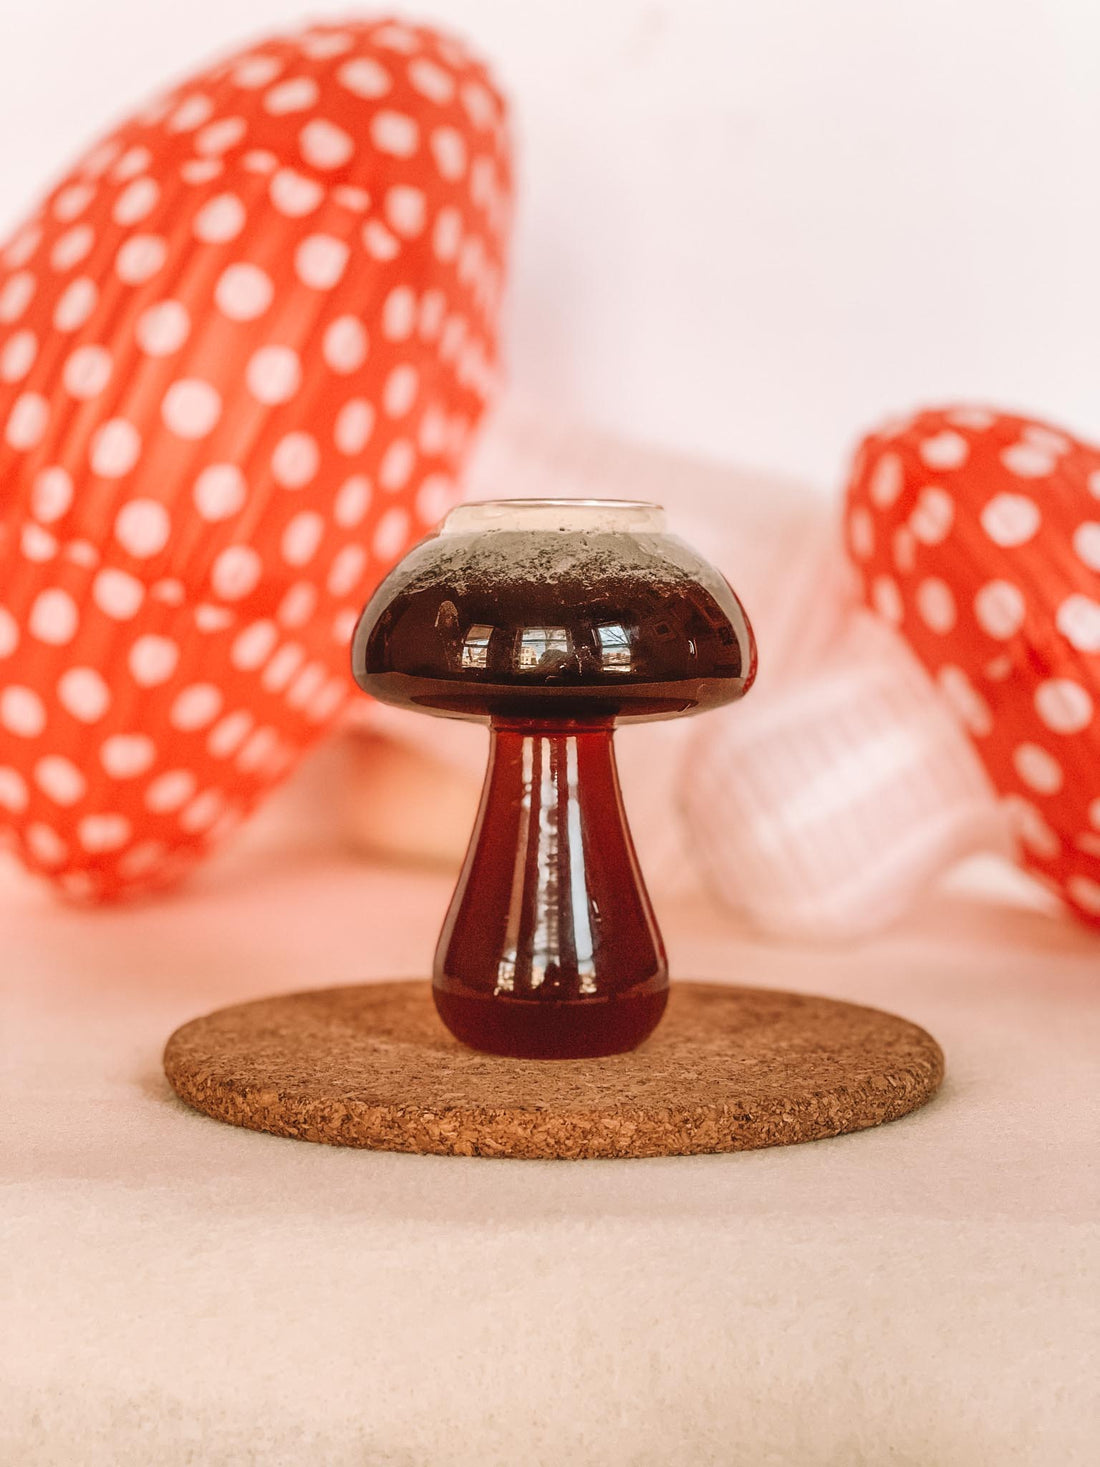 mushroom shaped cup with blurred background